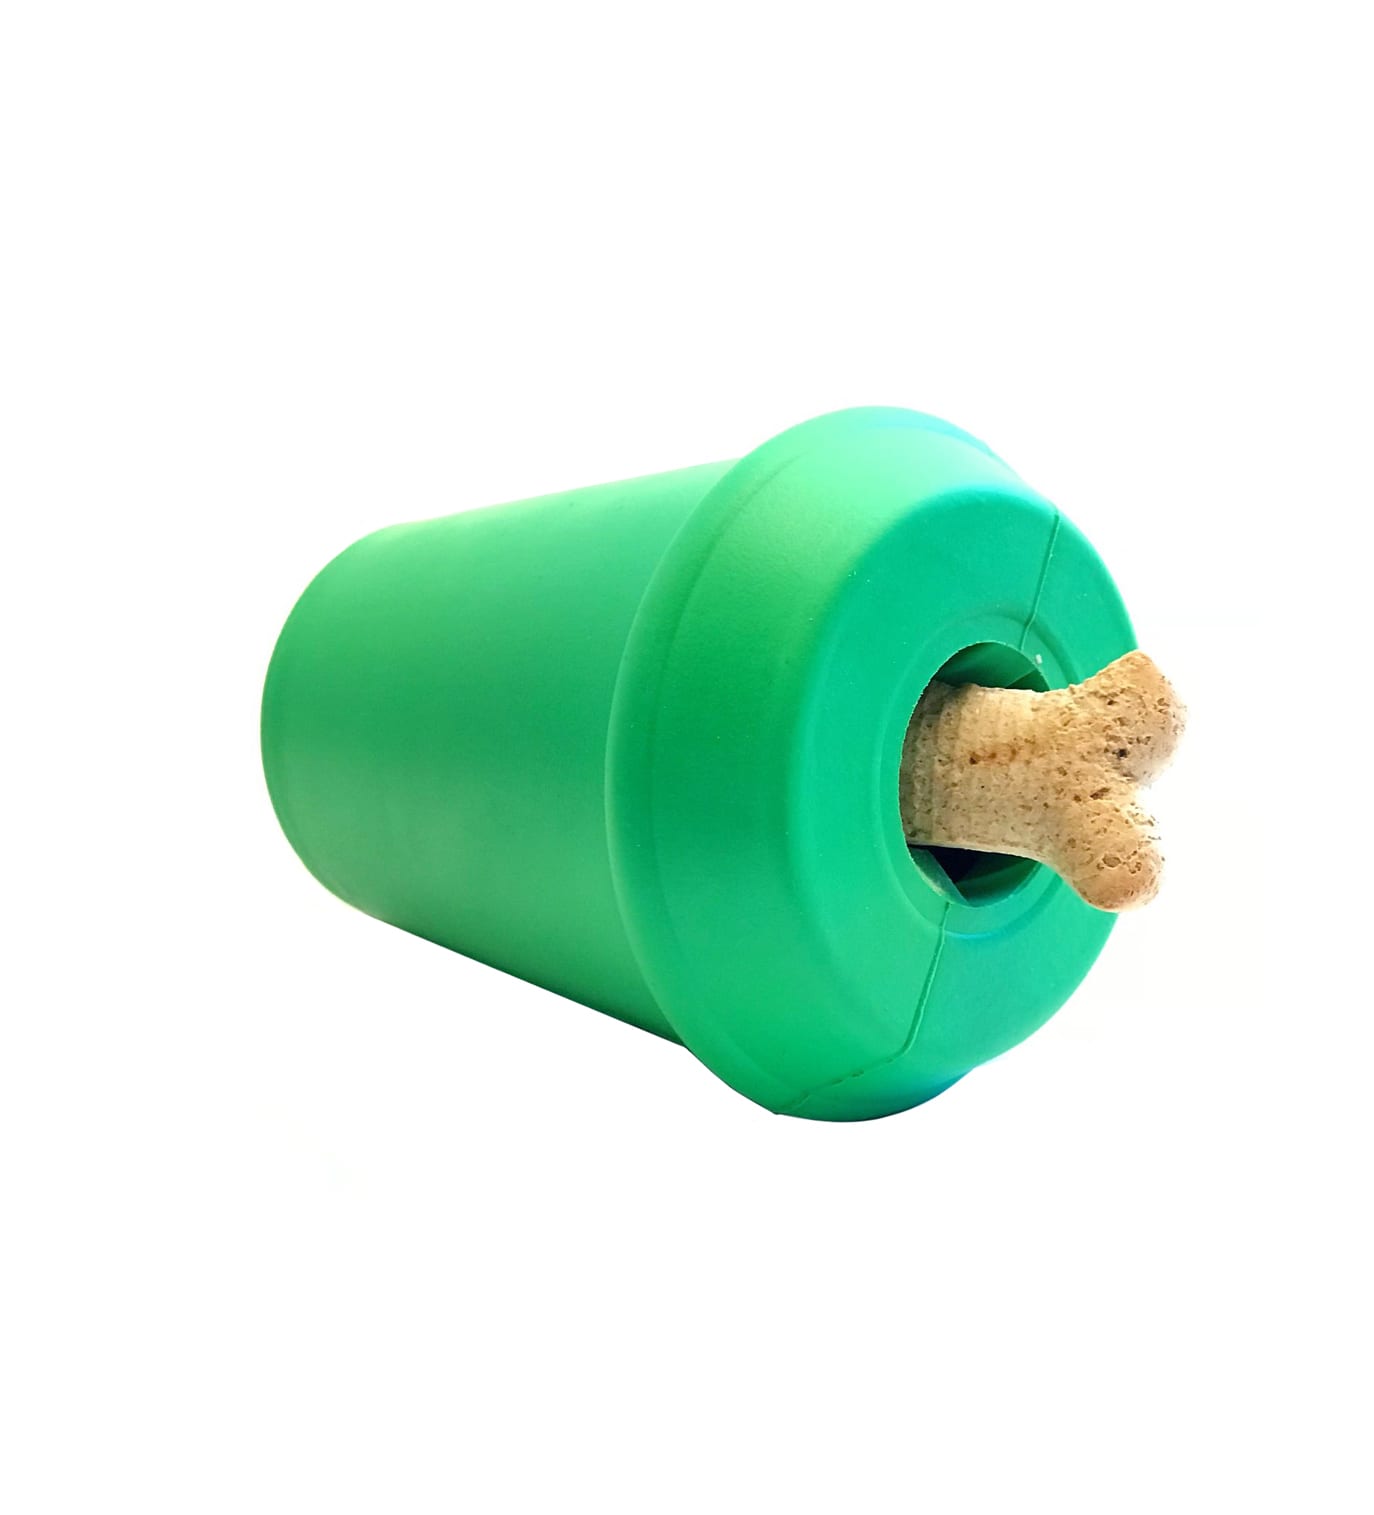 https://mooshiepets.com/content/uploads/2019/12/SODAPUP-COFFEE-CUP-CHEW-TOY-AND-TREAT-DISPENSER-FOR-DOGS-Side-2-.jpg